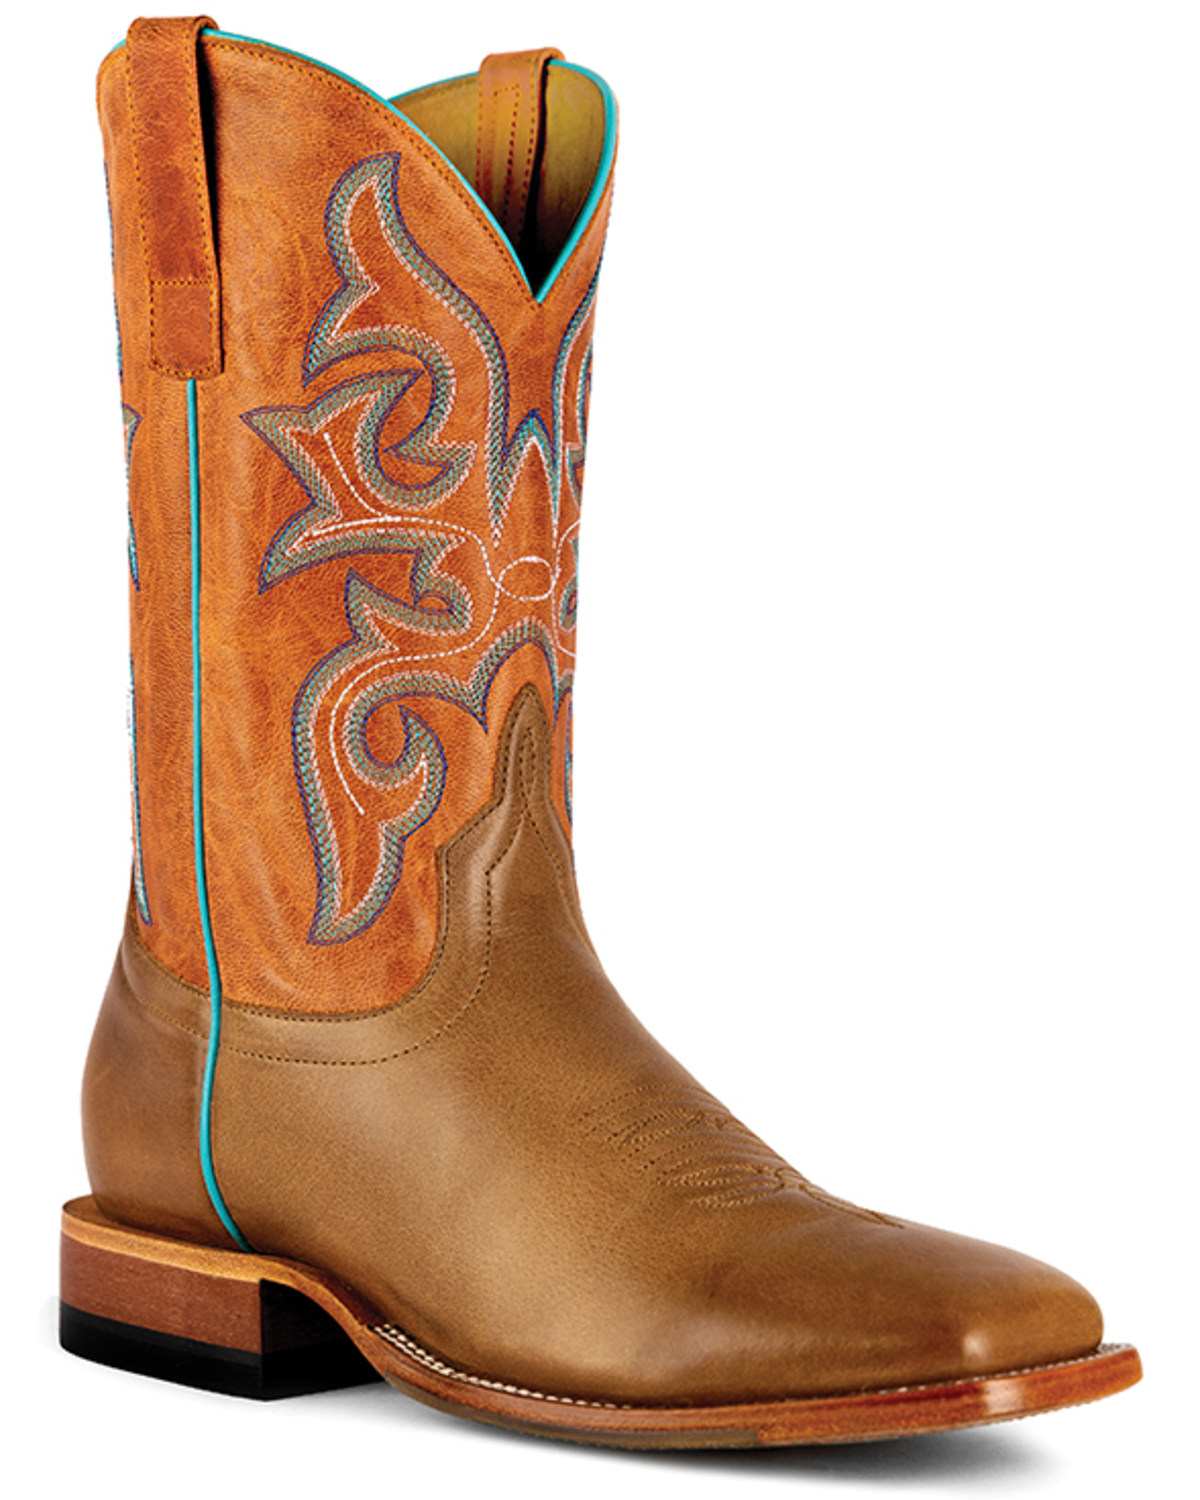 Horse Power Men's Sugared Western Performance Boots - Broad Square Toe